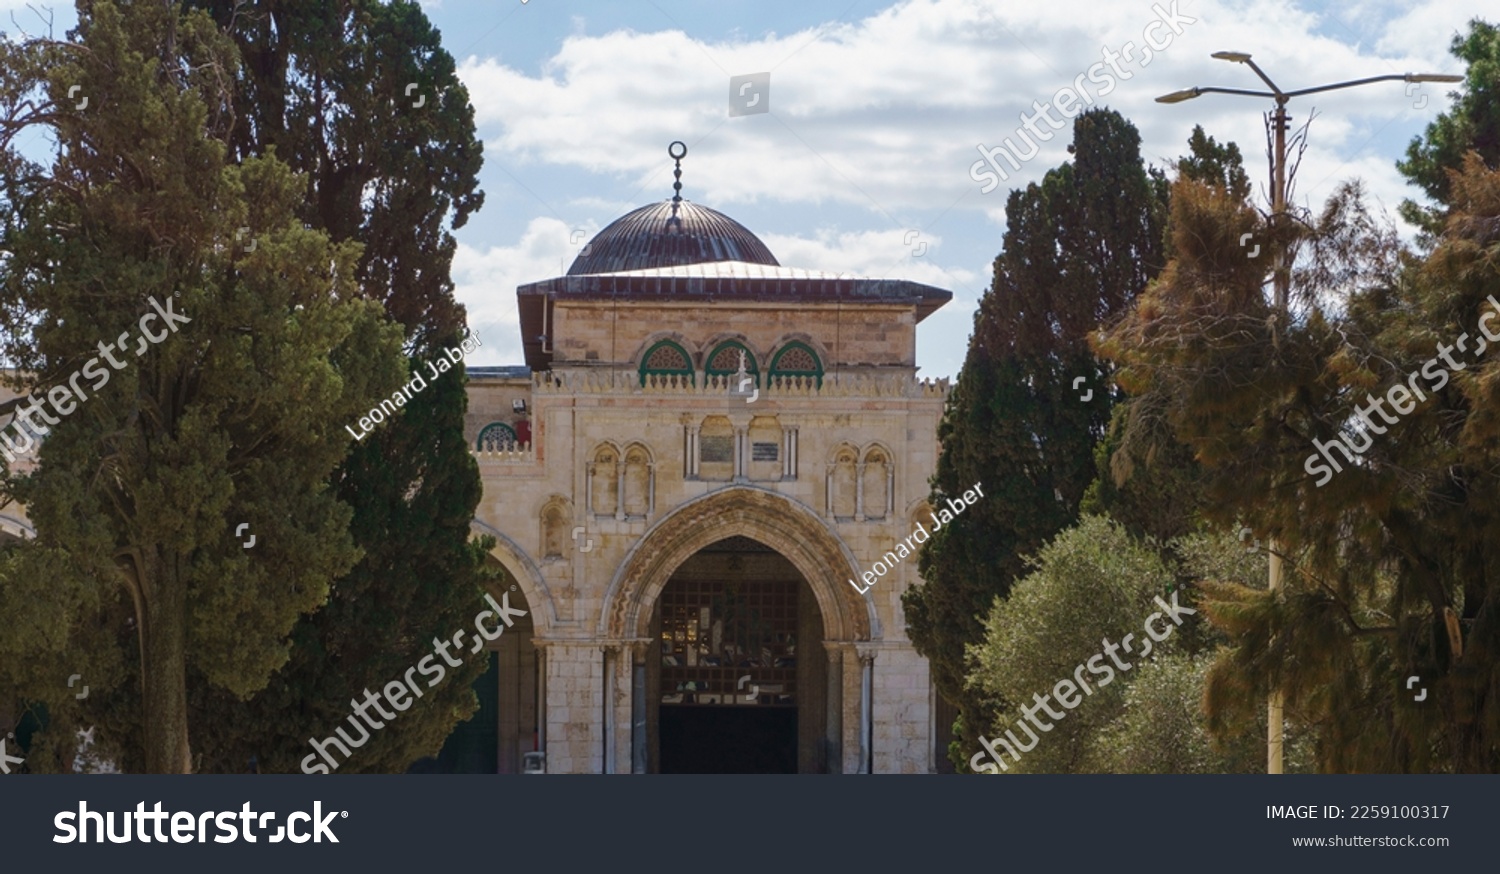 The Dome of the rock, Al-Aqsa Mosque, Jerusalem old city, Palestine #2259100317